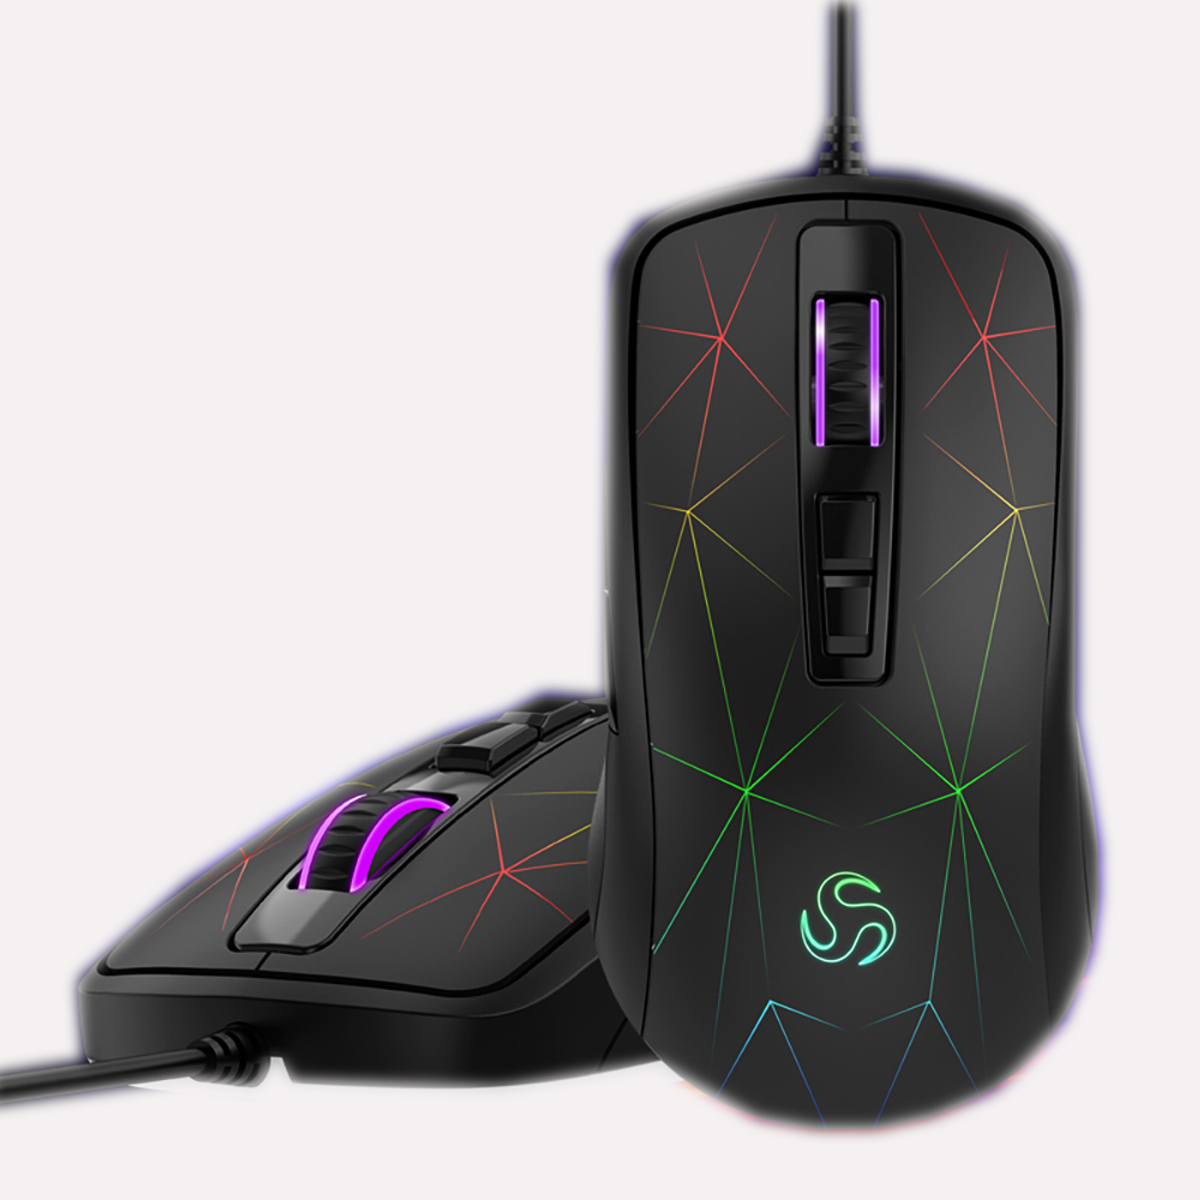 

G800 4000DPI 7Button USB Wired RGB Backlight Ergonomic Programmable Optical Gaming Mouse